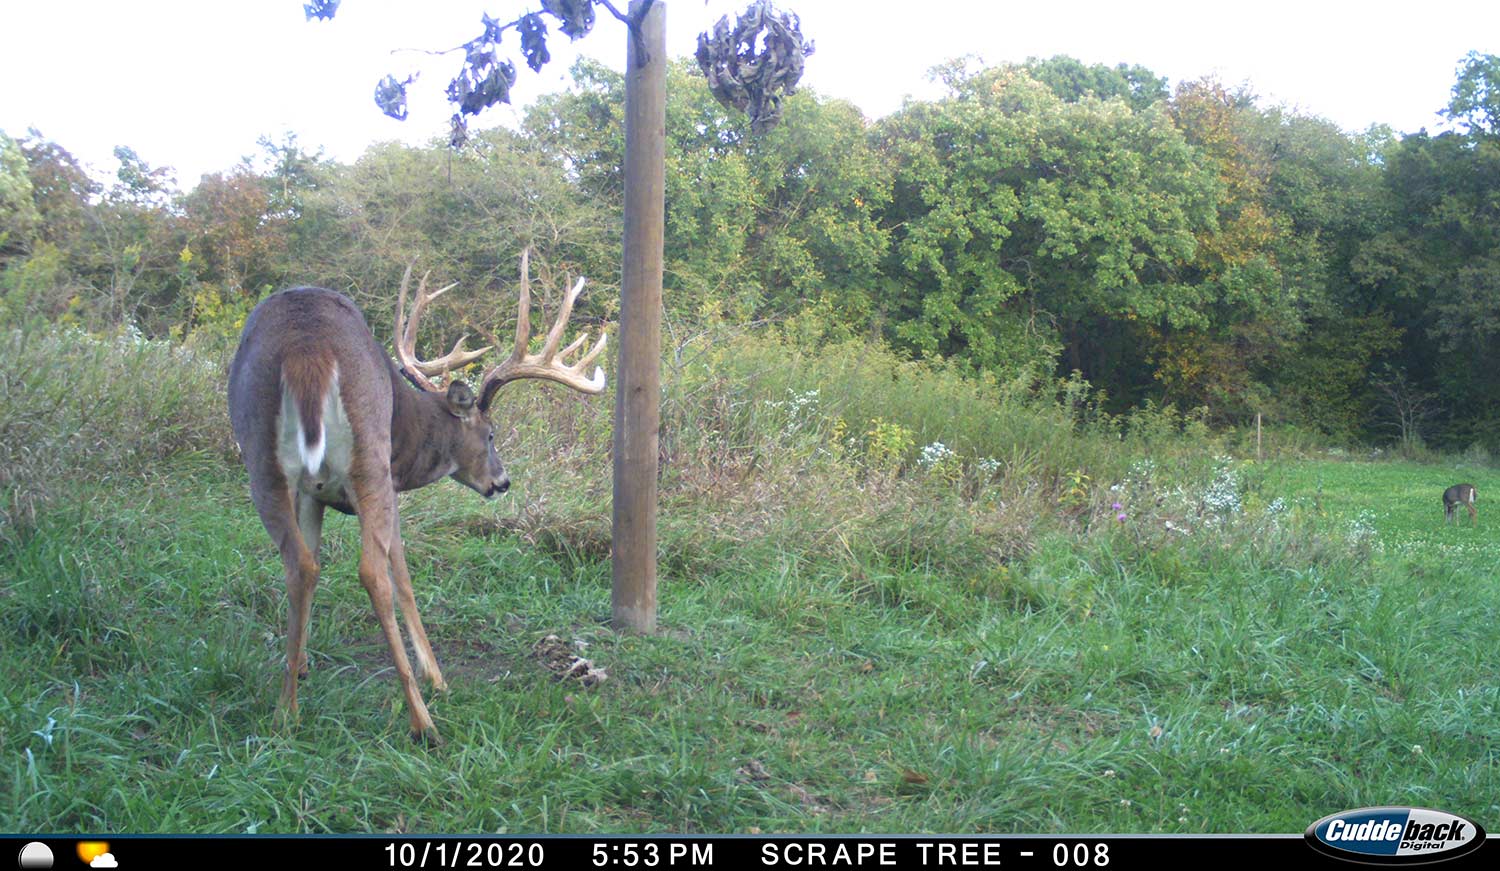 Trail camera footage of a whitetail deer next to a scraping tree.